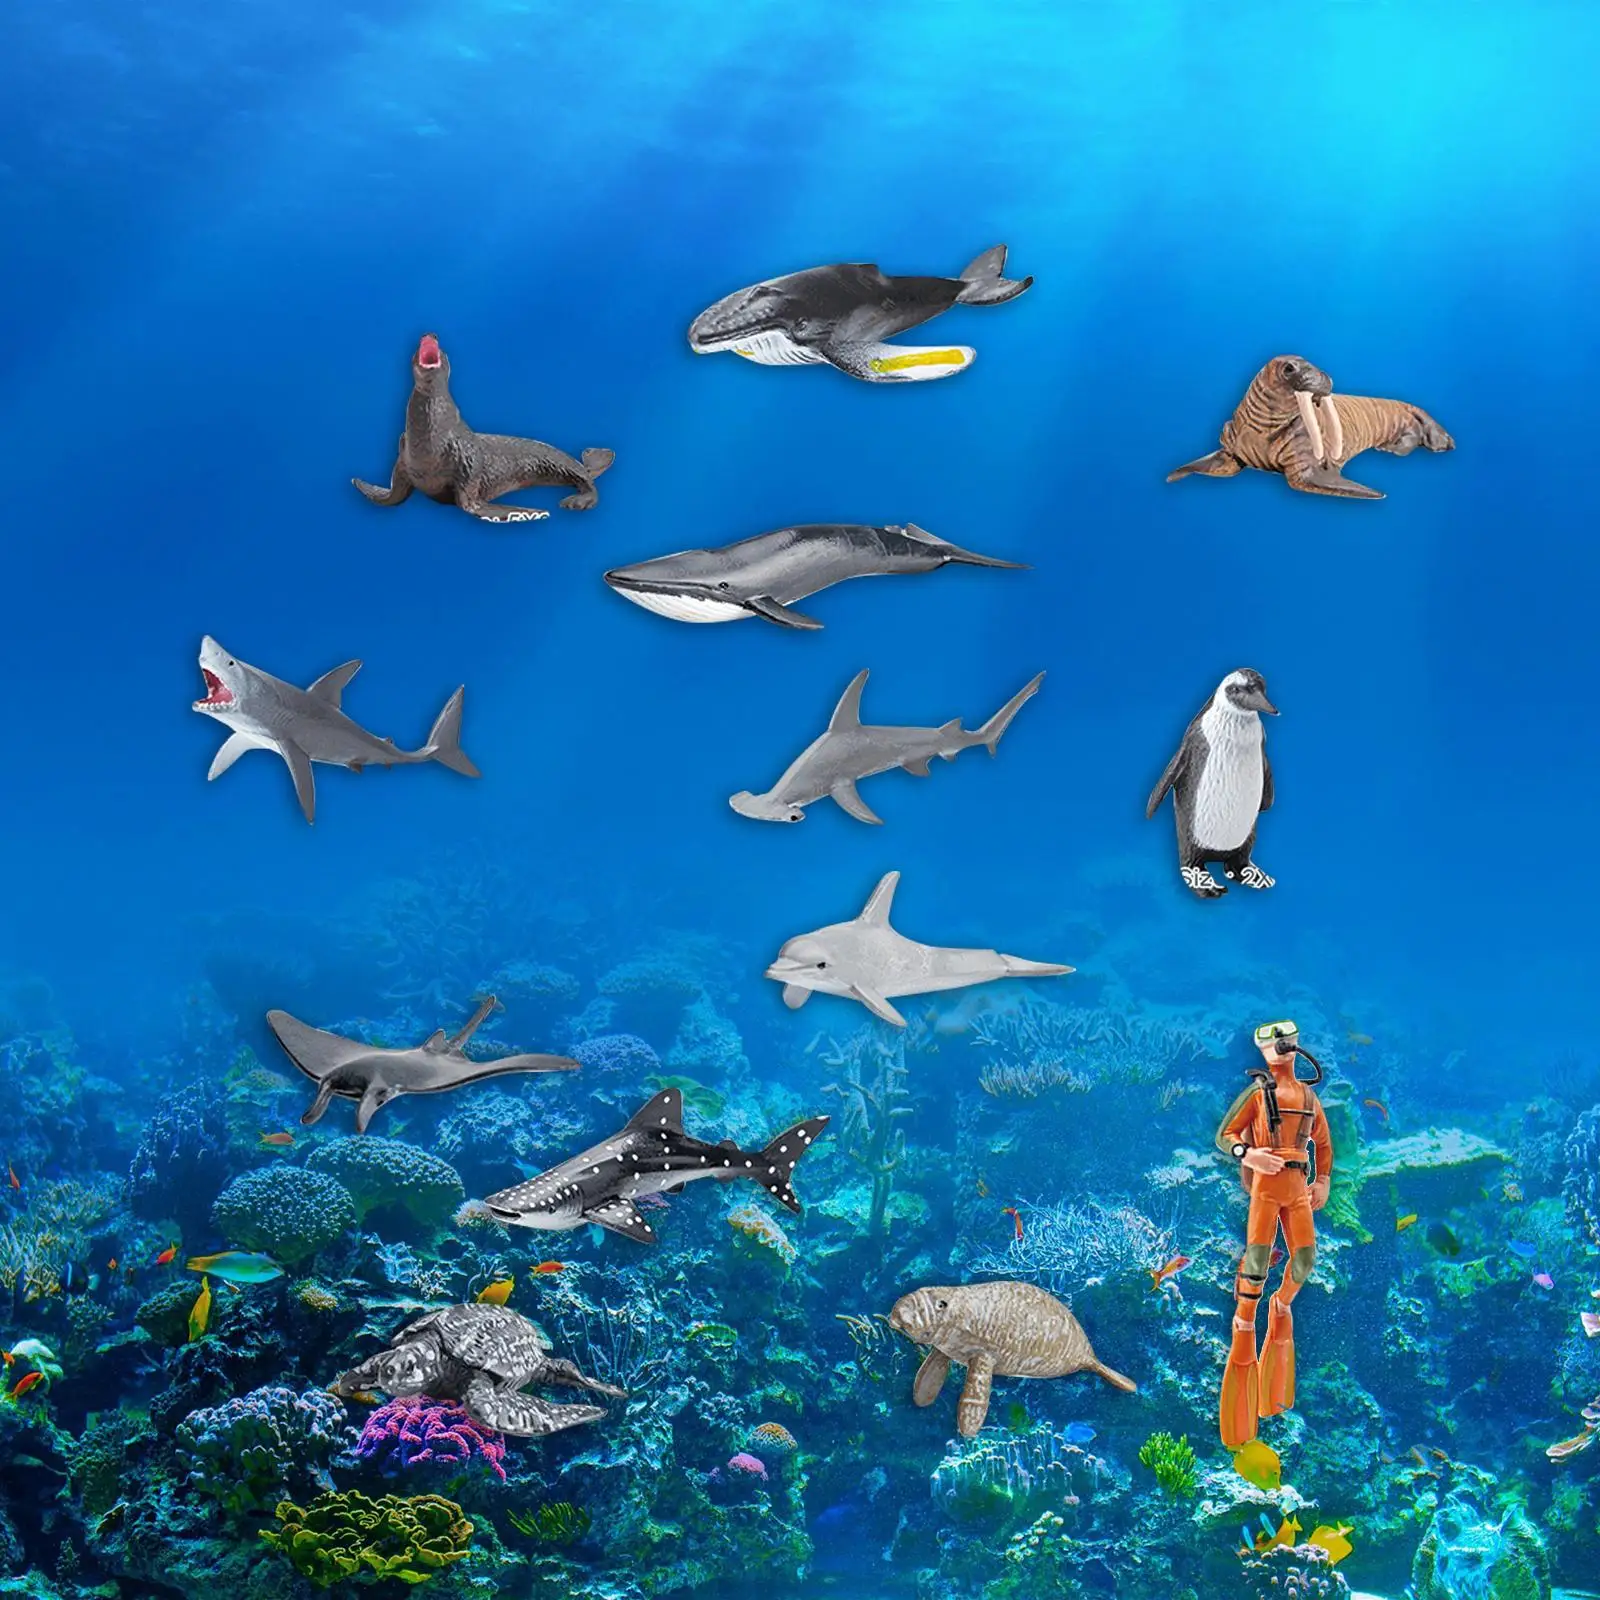 13 Pieces Sea Animal under The Sea Life Figure Figurines Simulation Animal Model Toy for Fish Tank Kids Ages 5 6 7 8 Years Old